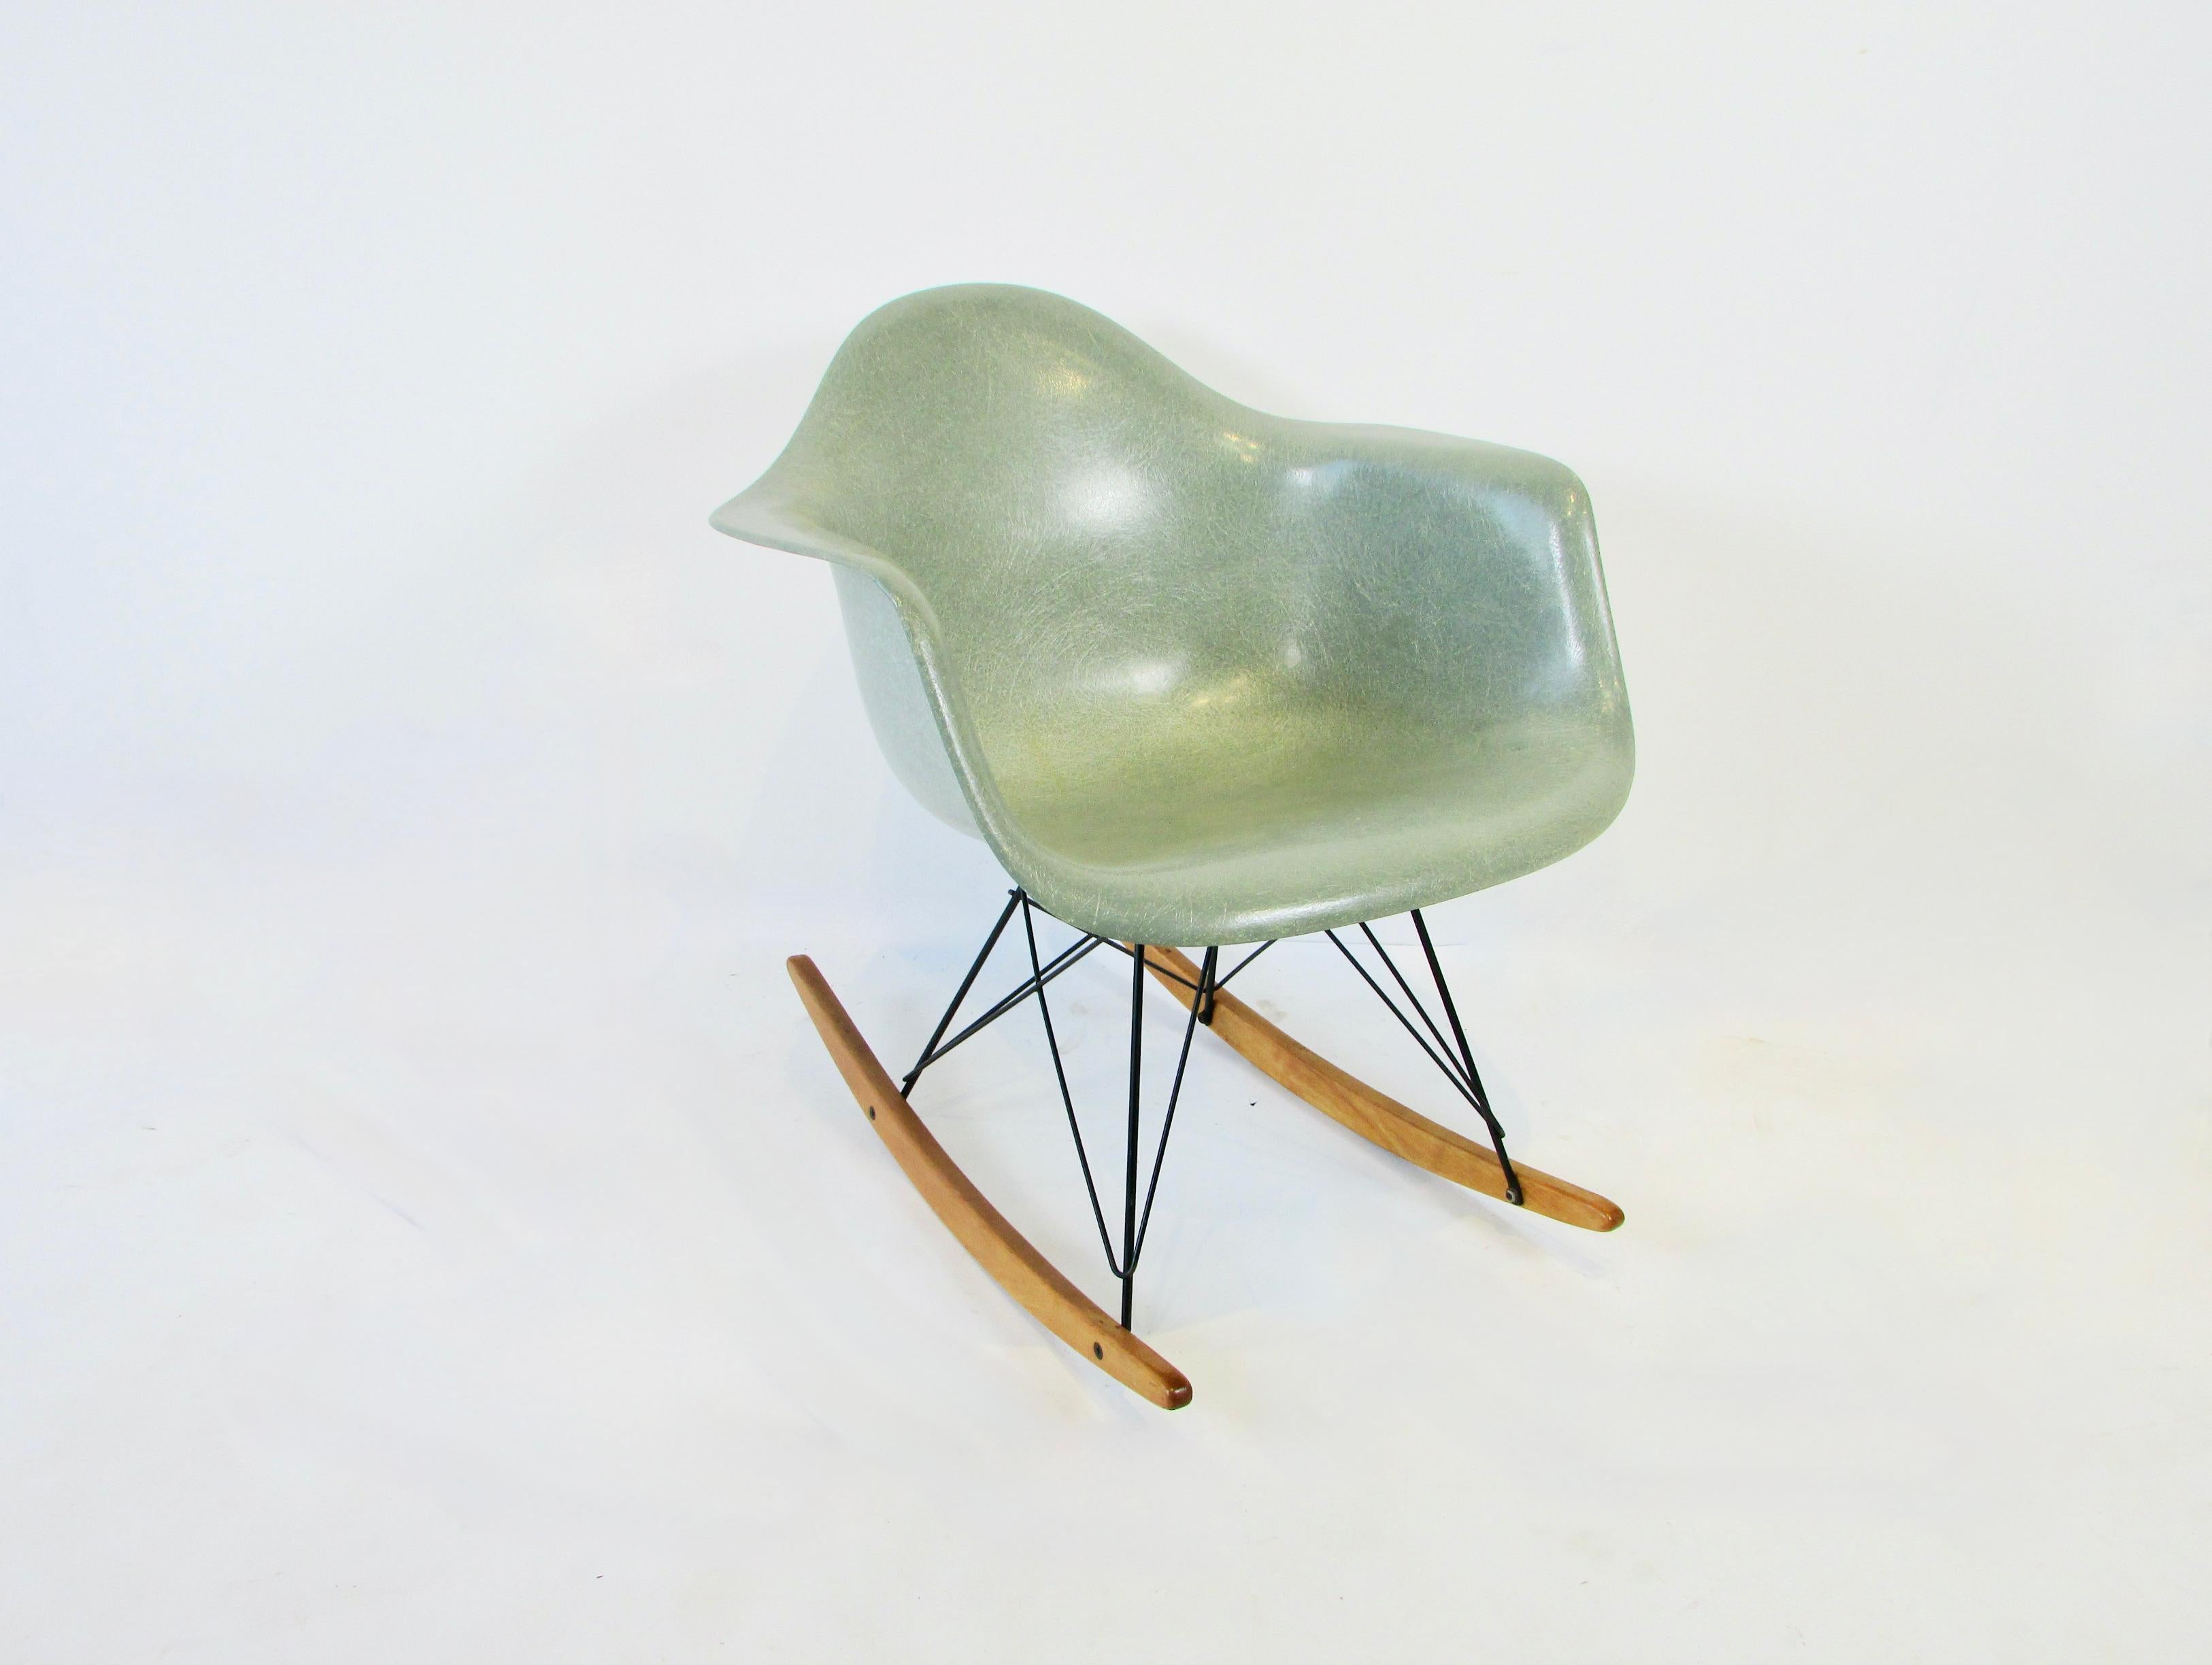 Charles and Ray Eames design for Herman Miller. RAR ( Rocking Arm steel Rod ) chair. Transitional chair having large biscuit shock mounts but after rope edge production. Most likely circa 1954. Fine original condition with no blemishes or shock